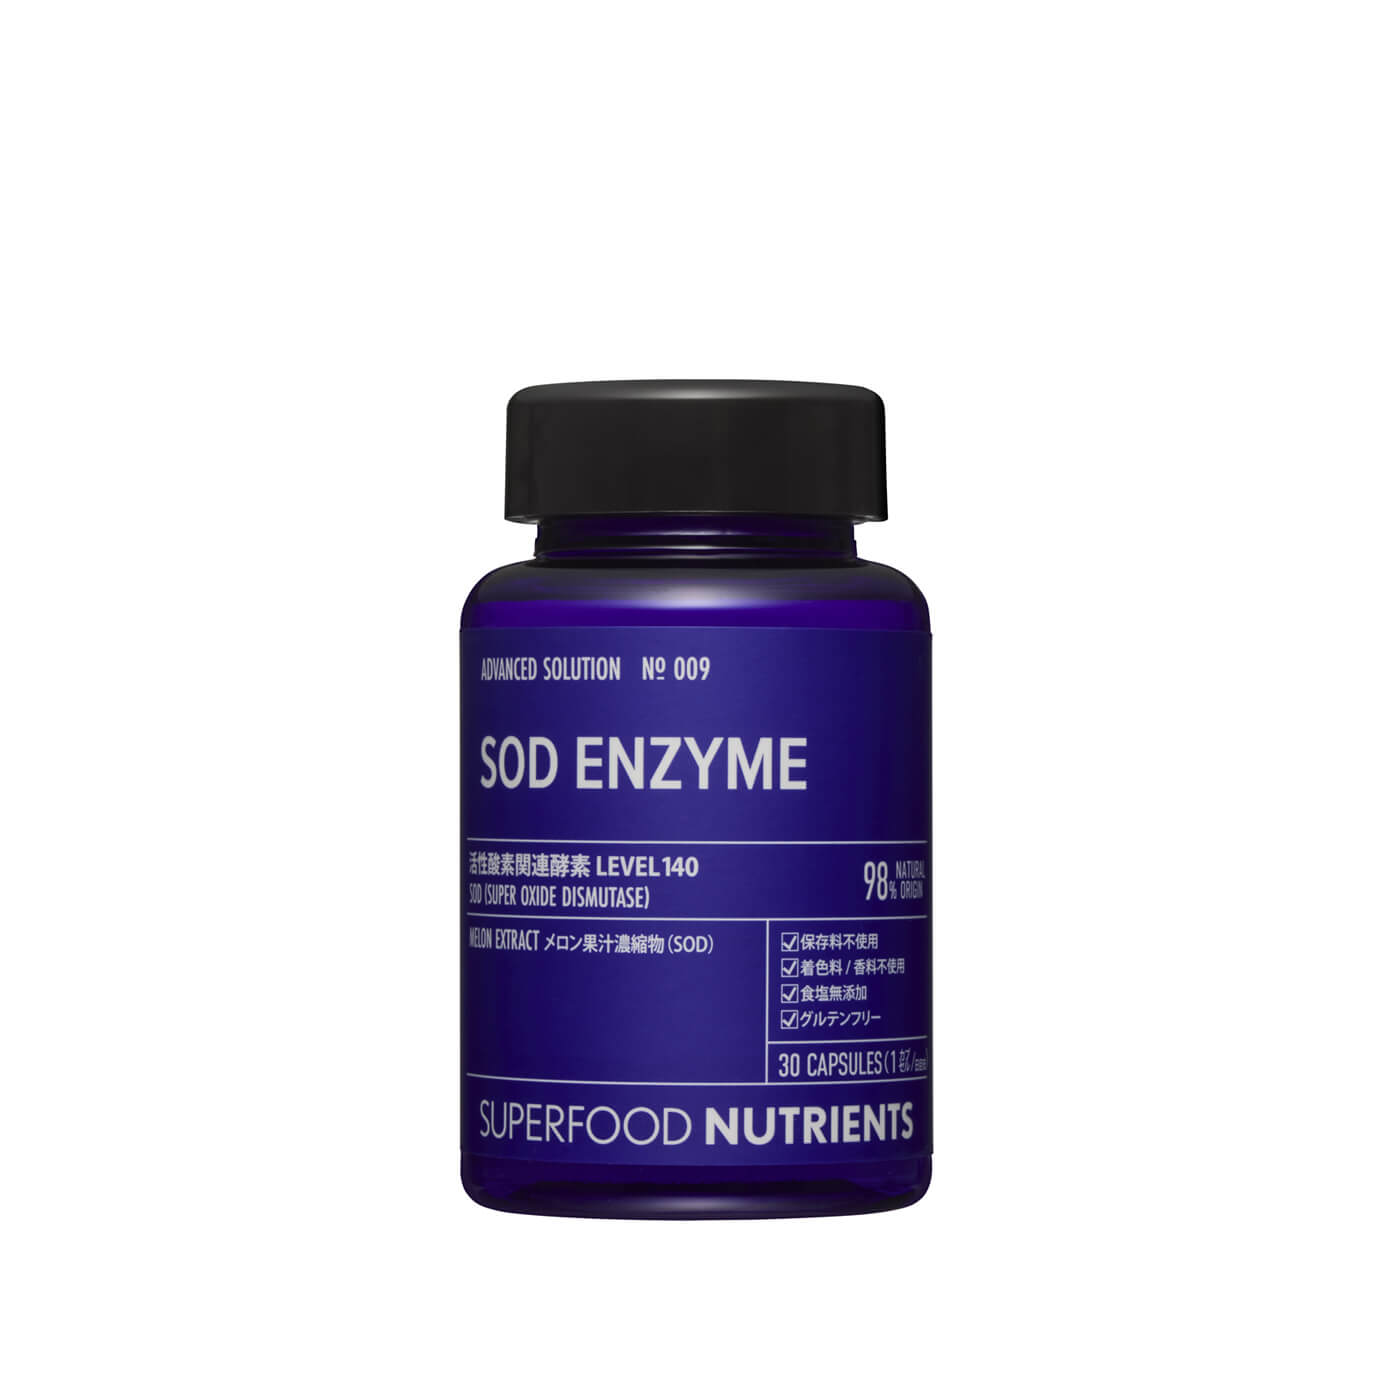 SUPERFOOD NUTRIENTS No.009 / SOD ENZYME
